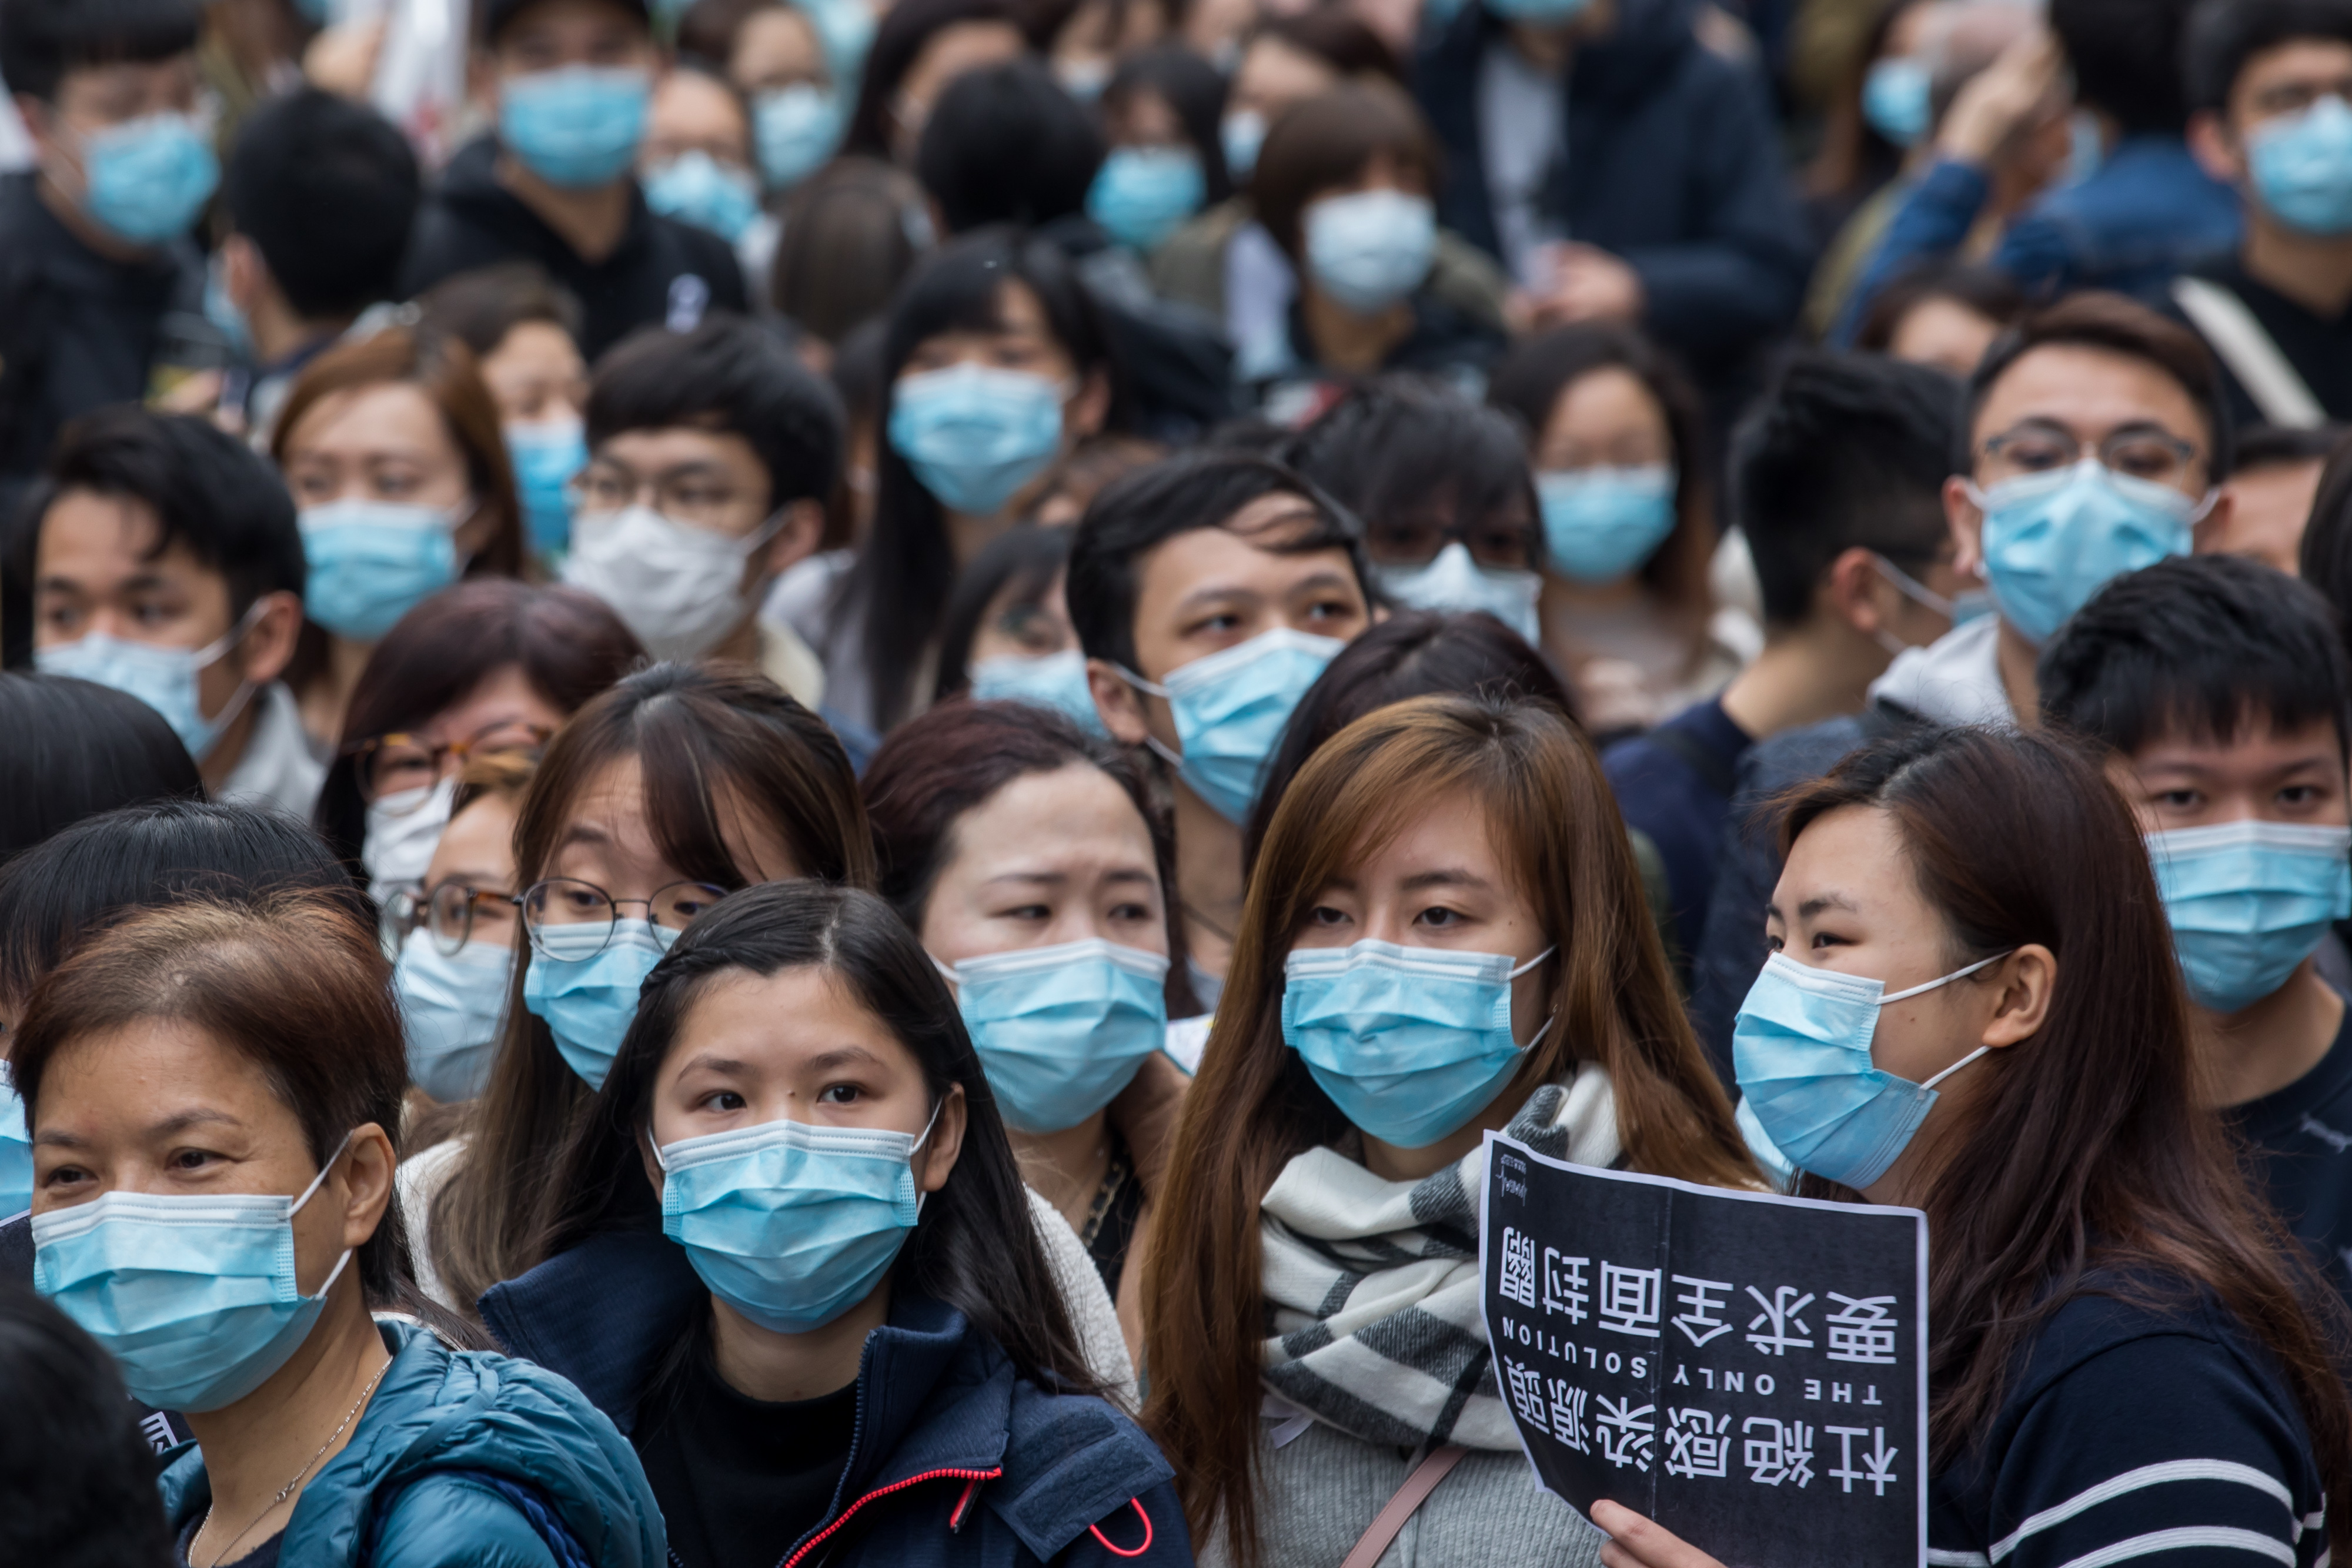 Medical workers wearing protective masks gather during a protest outside the Hospital Authority's head office in Hong Kong, China, on Feb. 4, 2020. (Paul Yeung/Bloomberg via Getty Images)